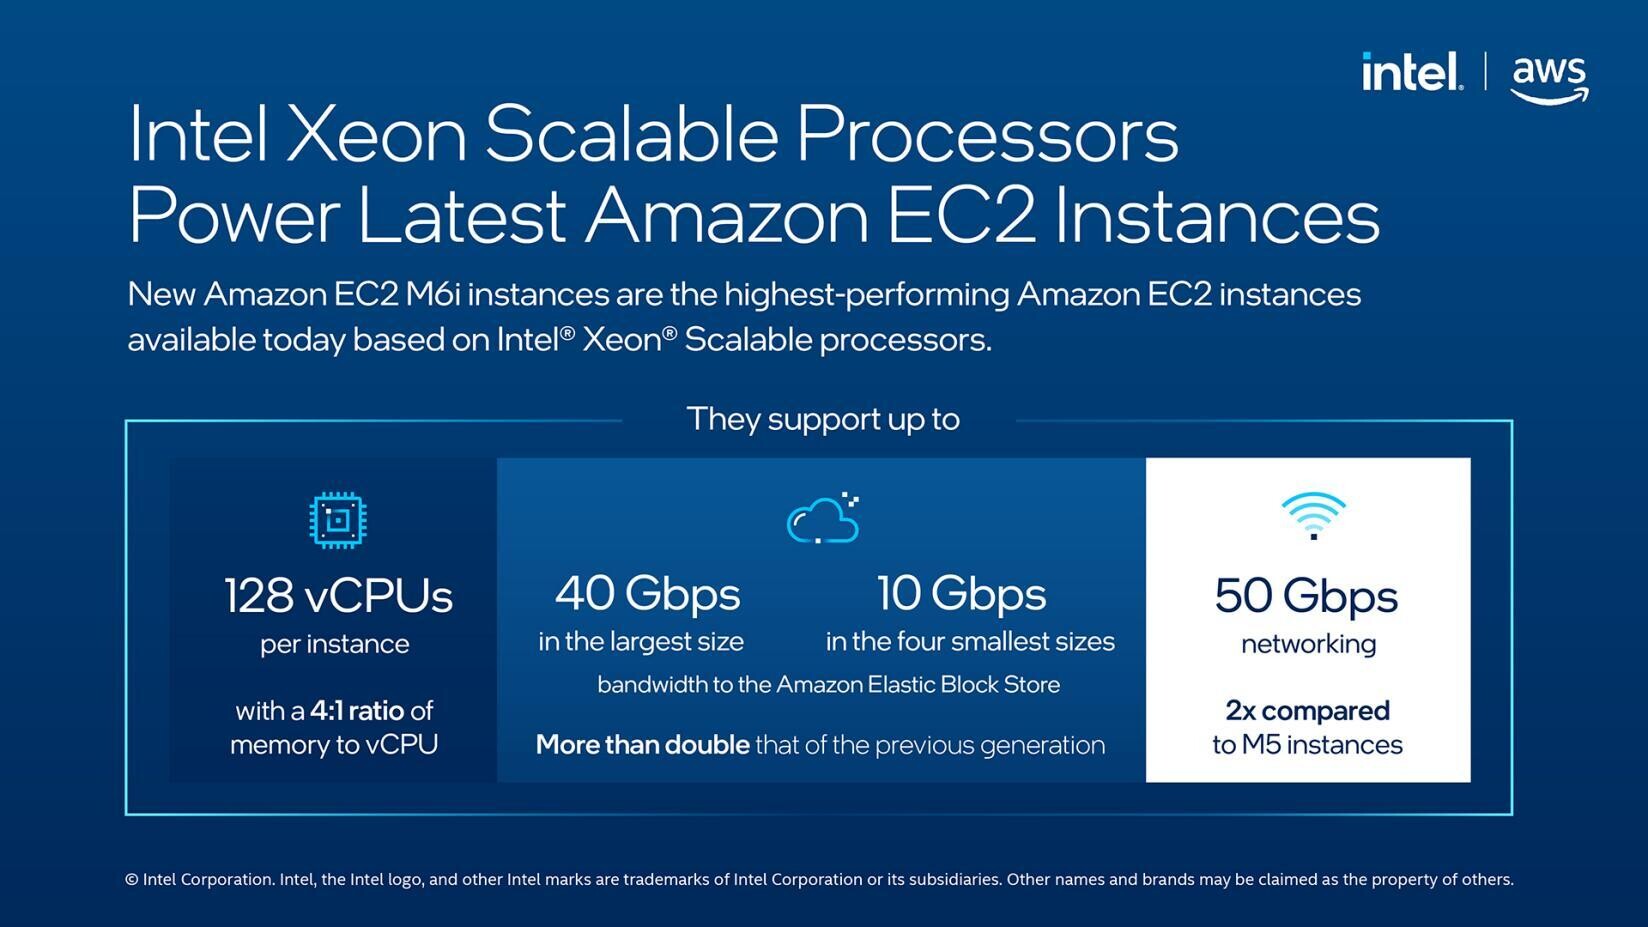 Intel Xeon scalable Processors. Xeon scalable 3. Amazon ec2. Powered by Intel. Power support intel